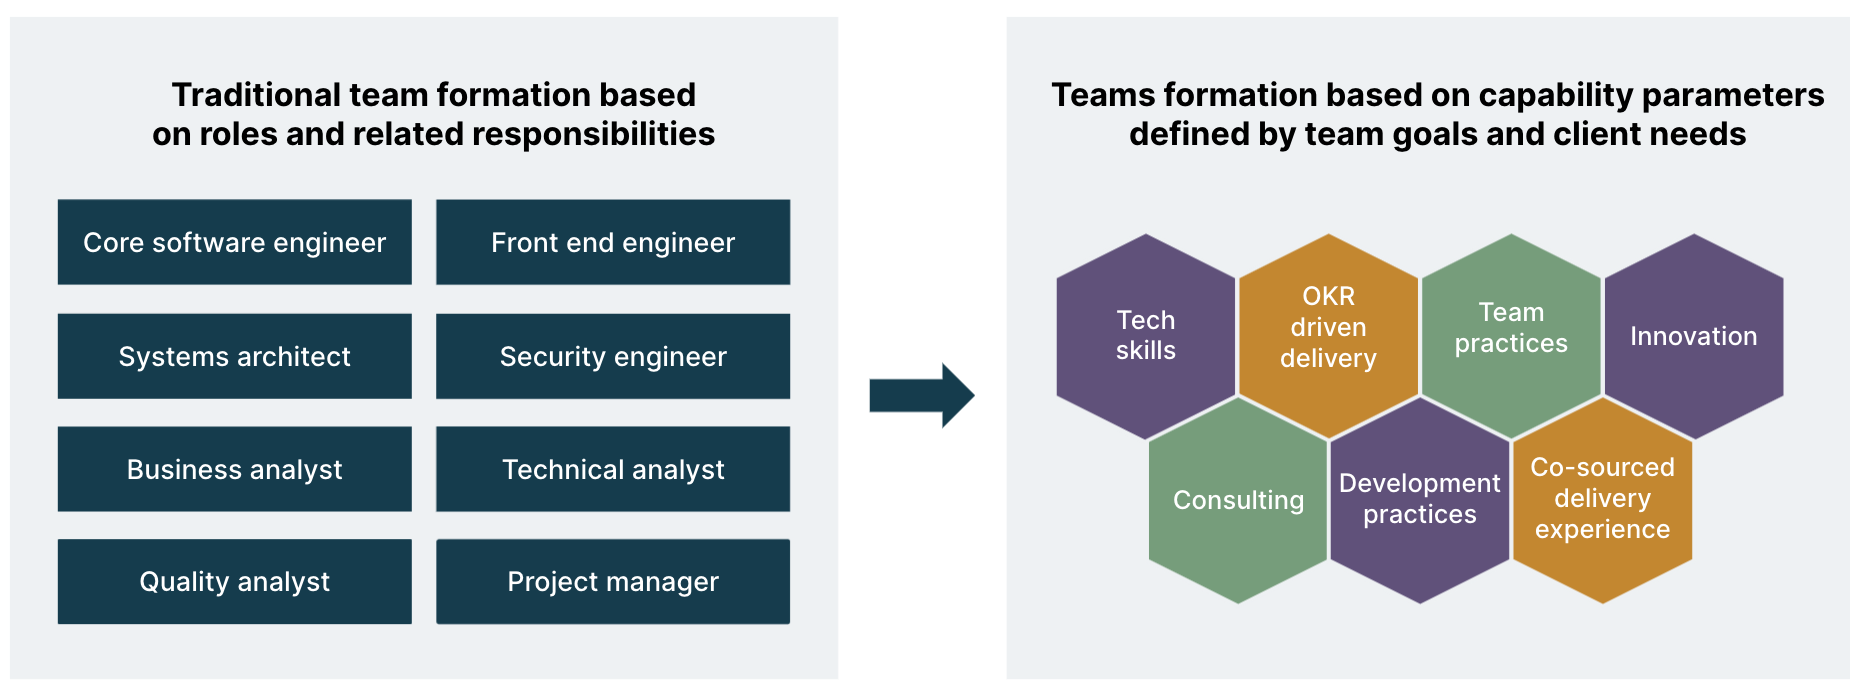  Capability parameters for a team